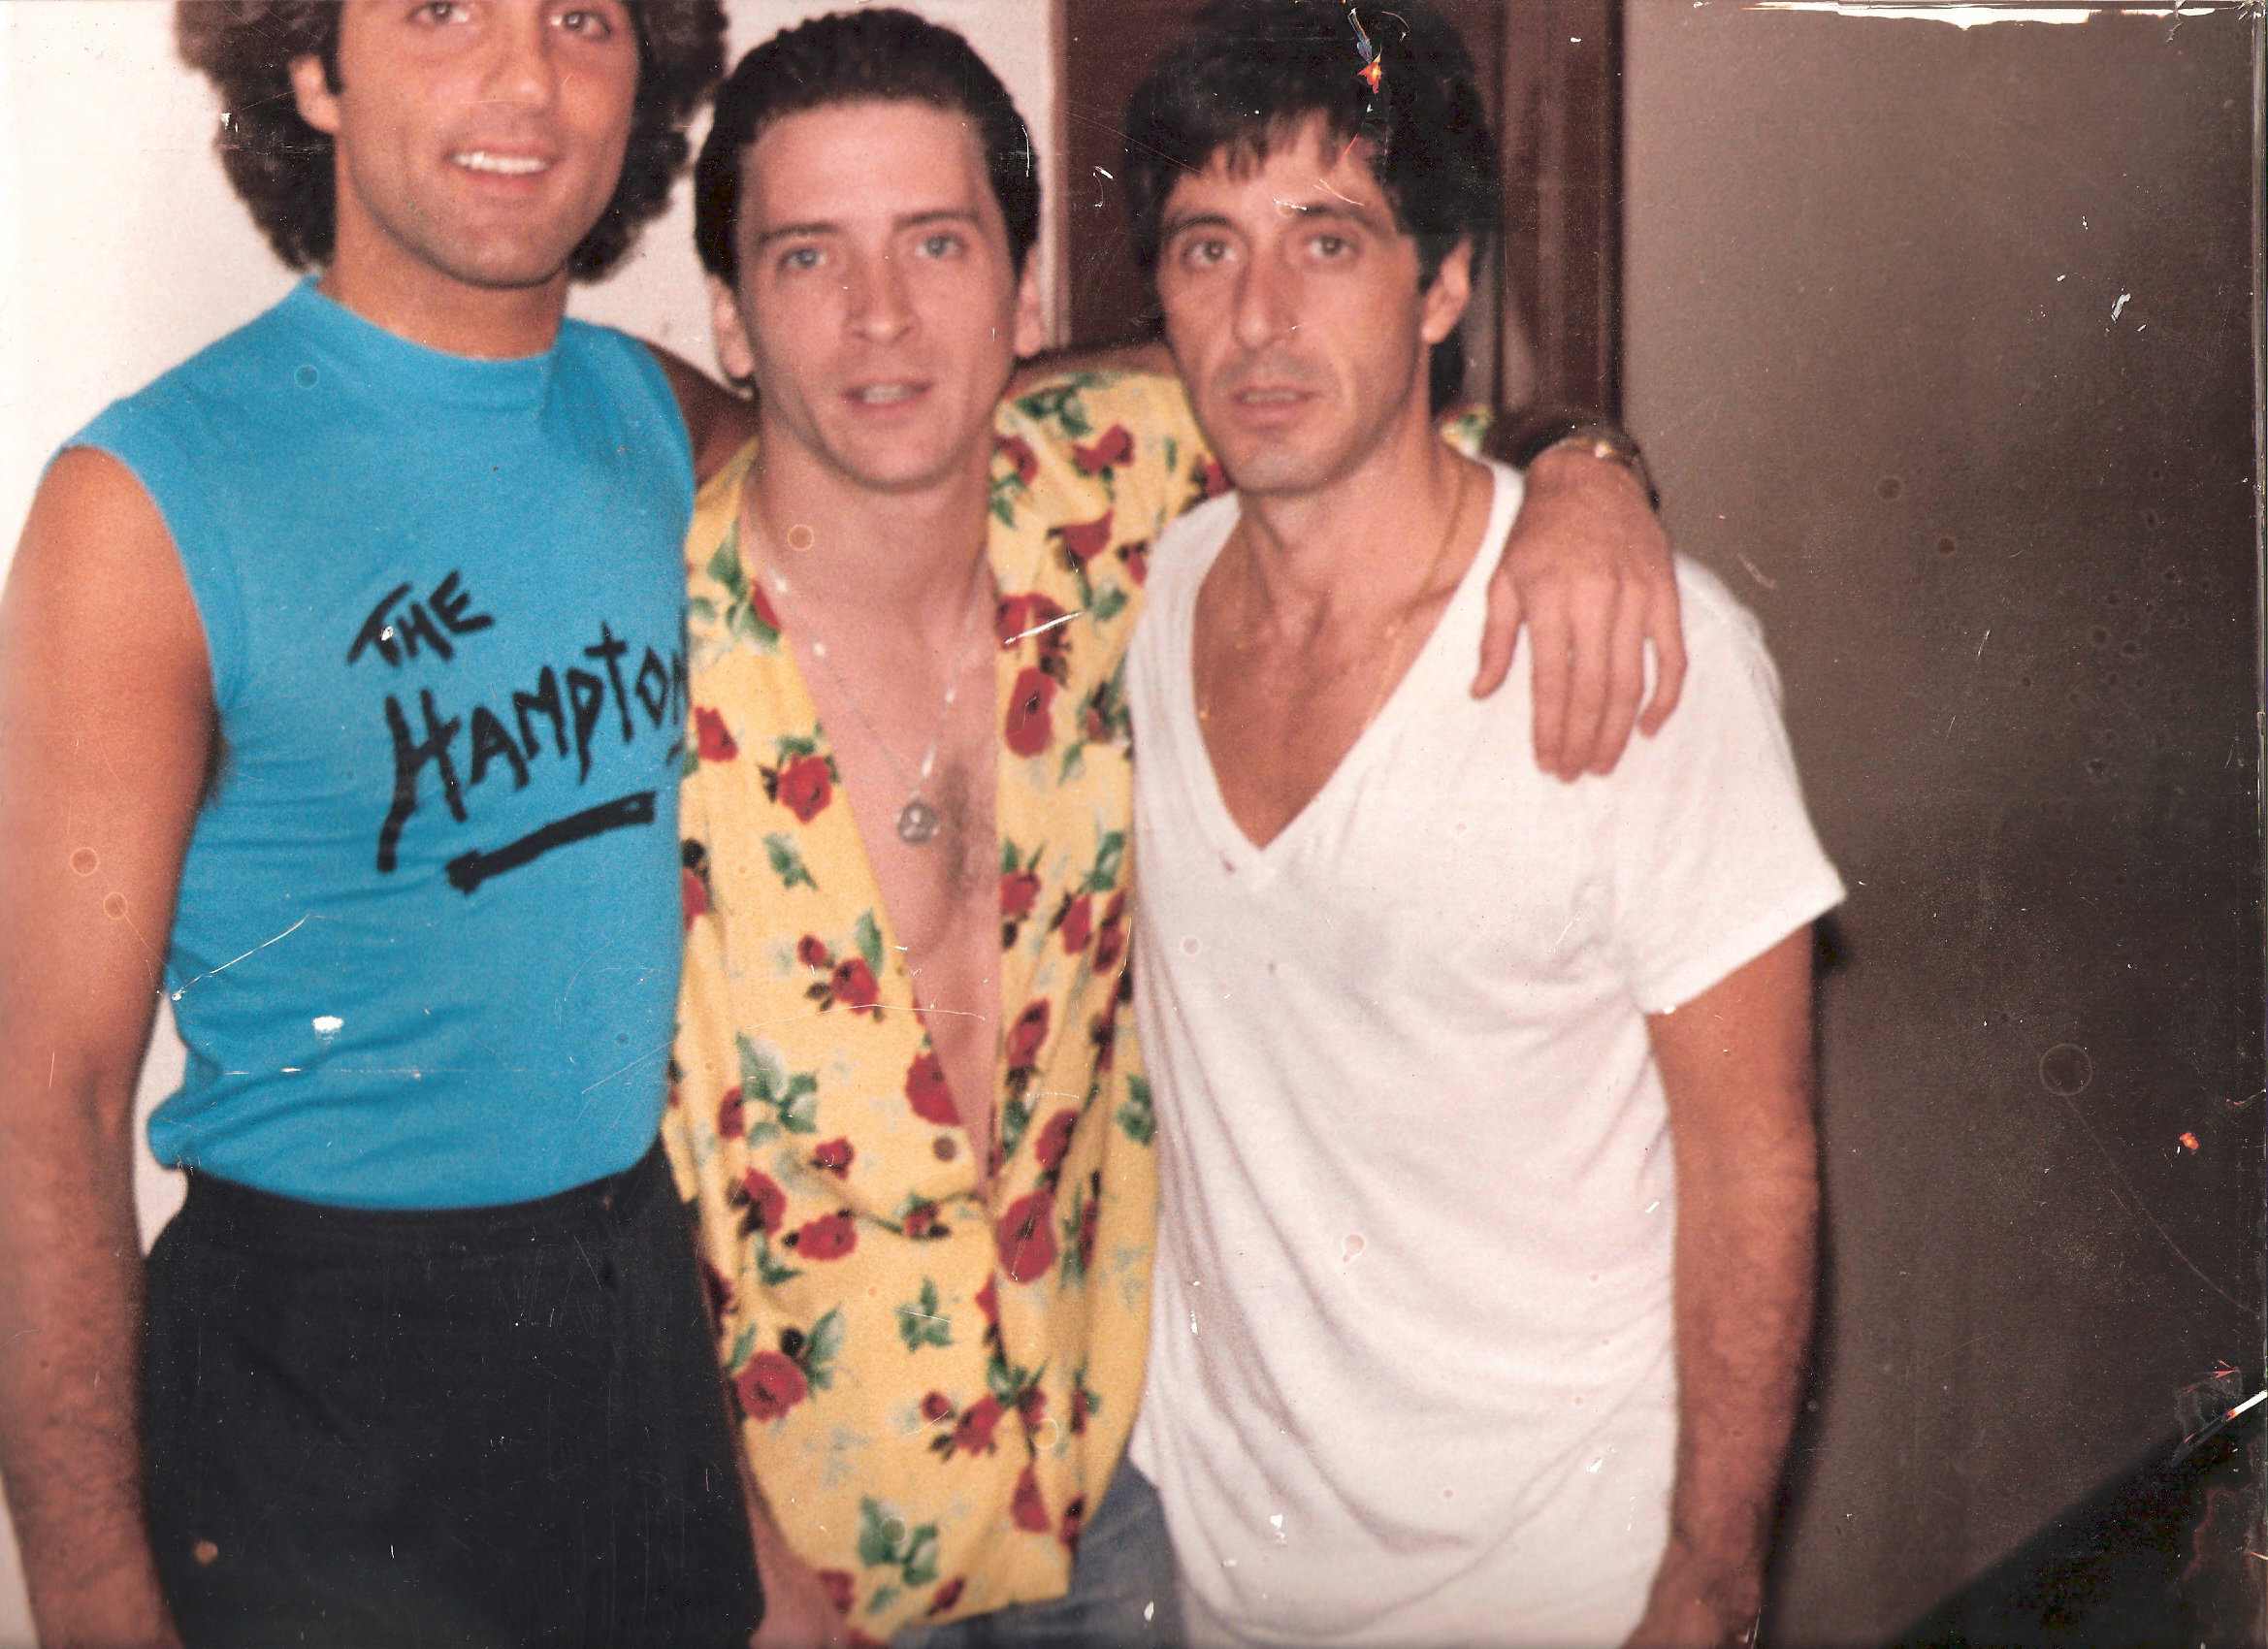 Actors (from L to R)Richard D'Alessandro,the late James Hayden and Al Pacino at the Kenndy Center in DC. Richard spent the weekend with his friend Jimmy while Jimmy did David Mamet's 